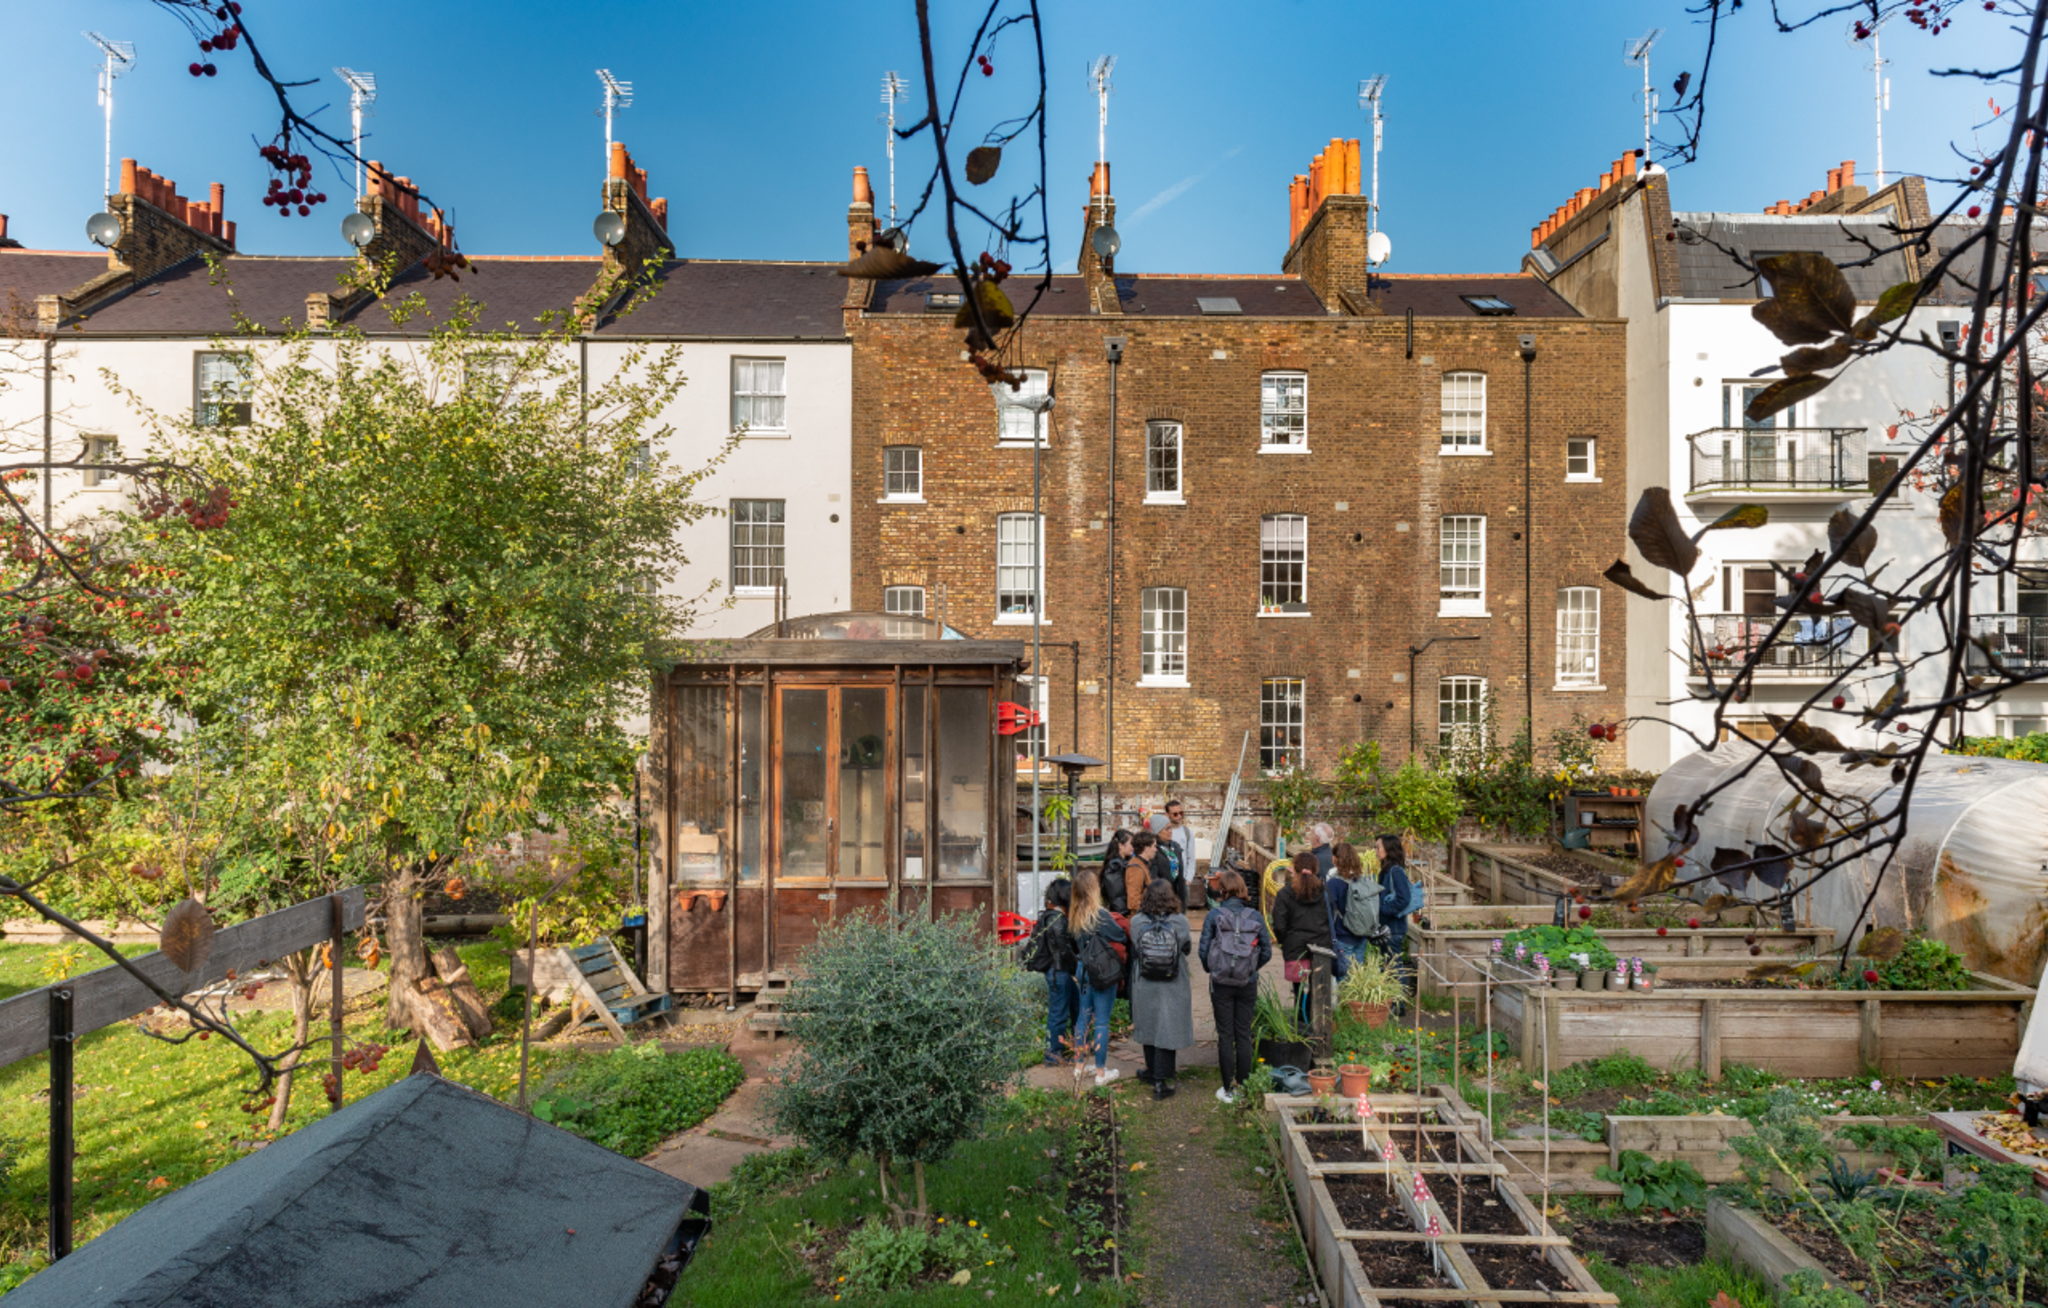 A small group speaking in an urban allotment, behind a row of terraced houses